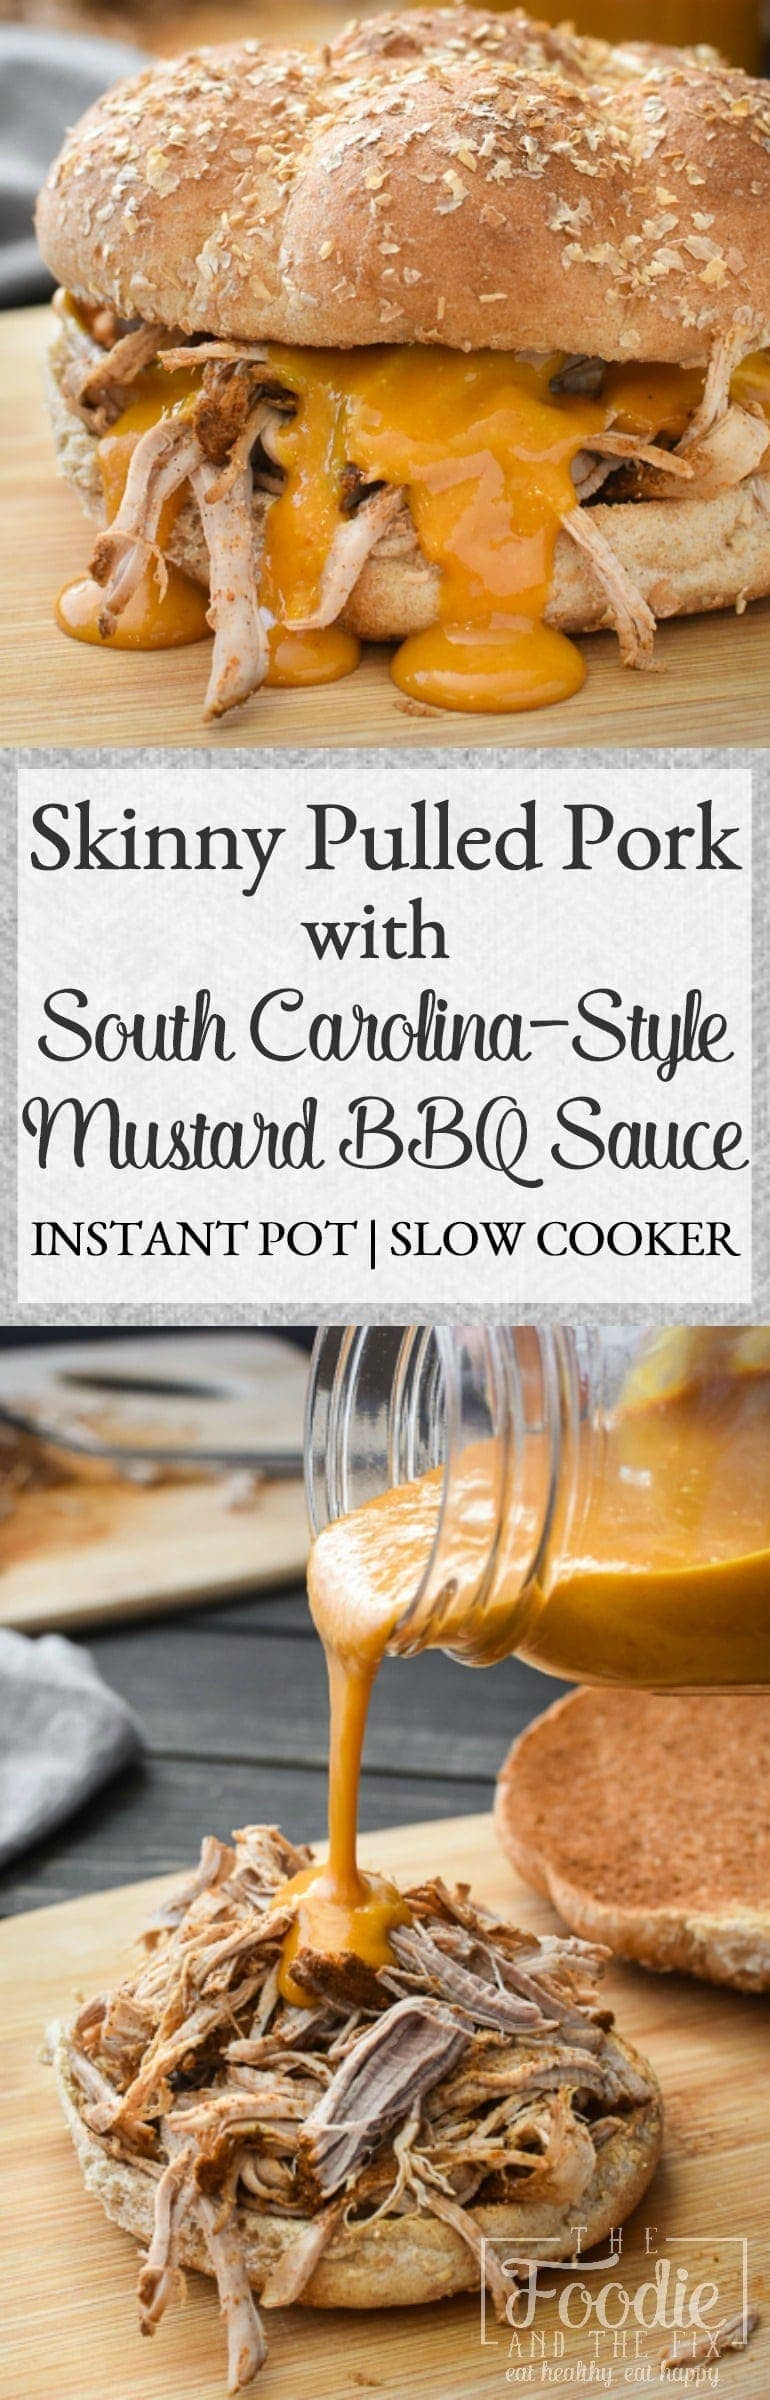 Does Bbq Sauce Have Dairy
 Healthy Pulled Pork with Mustard BBQ Sauce Instant Pot